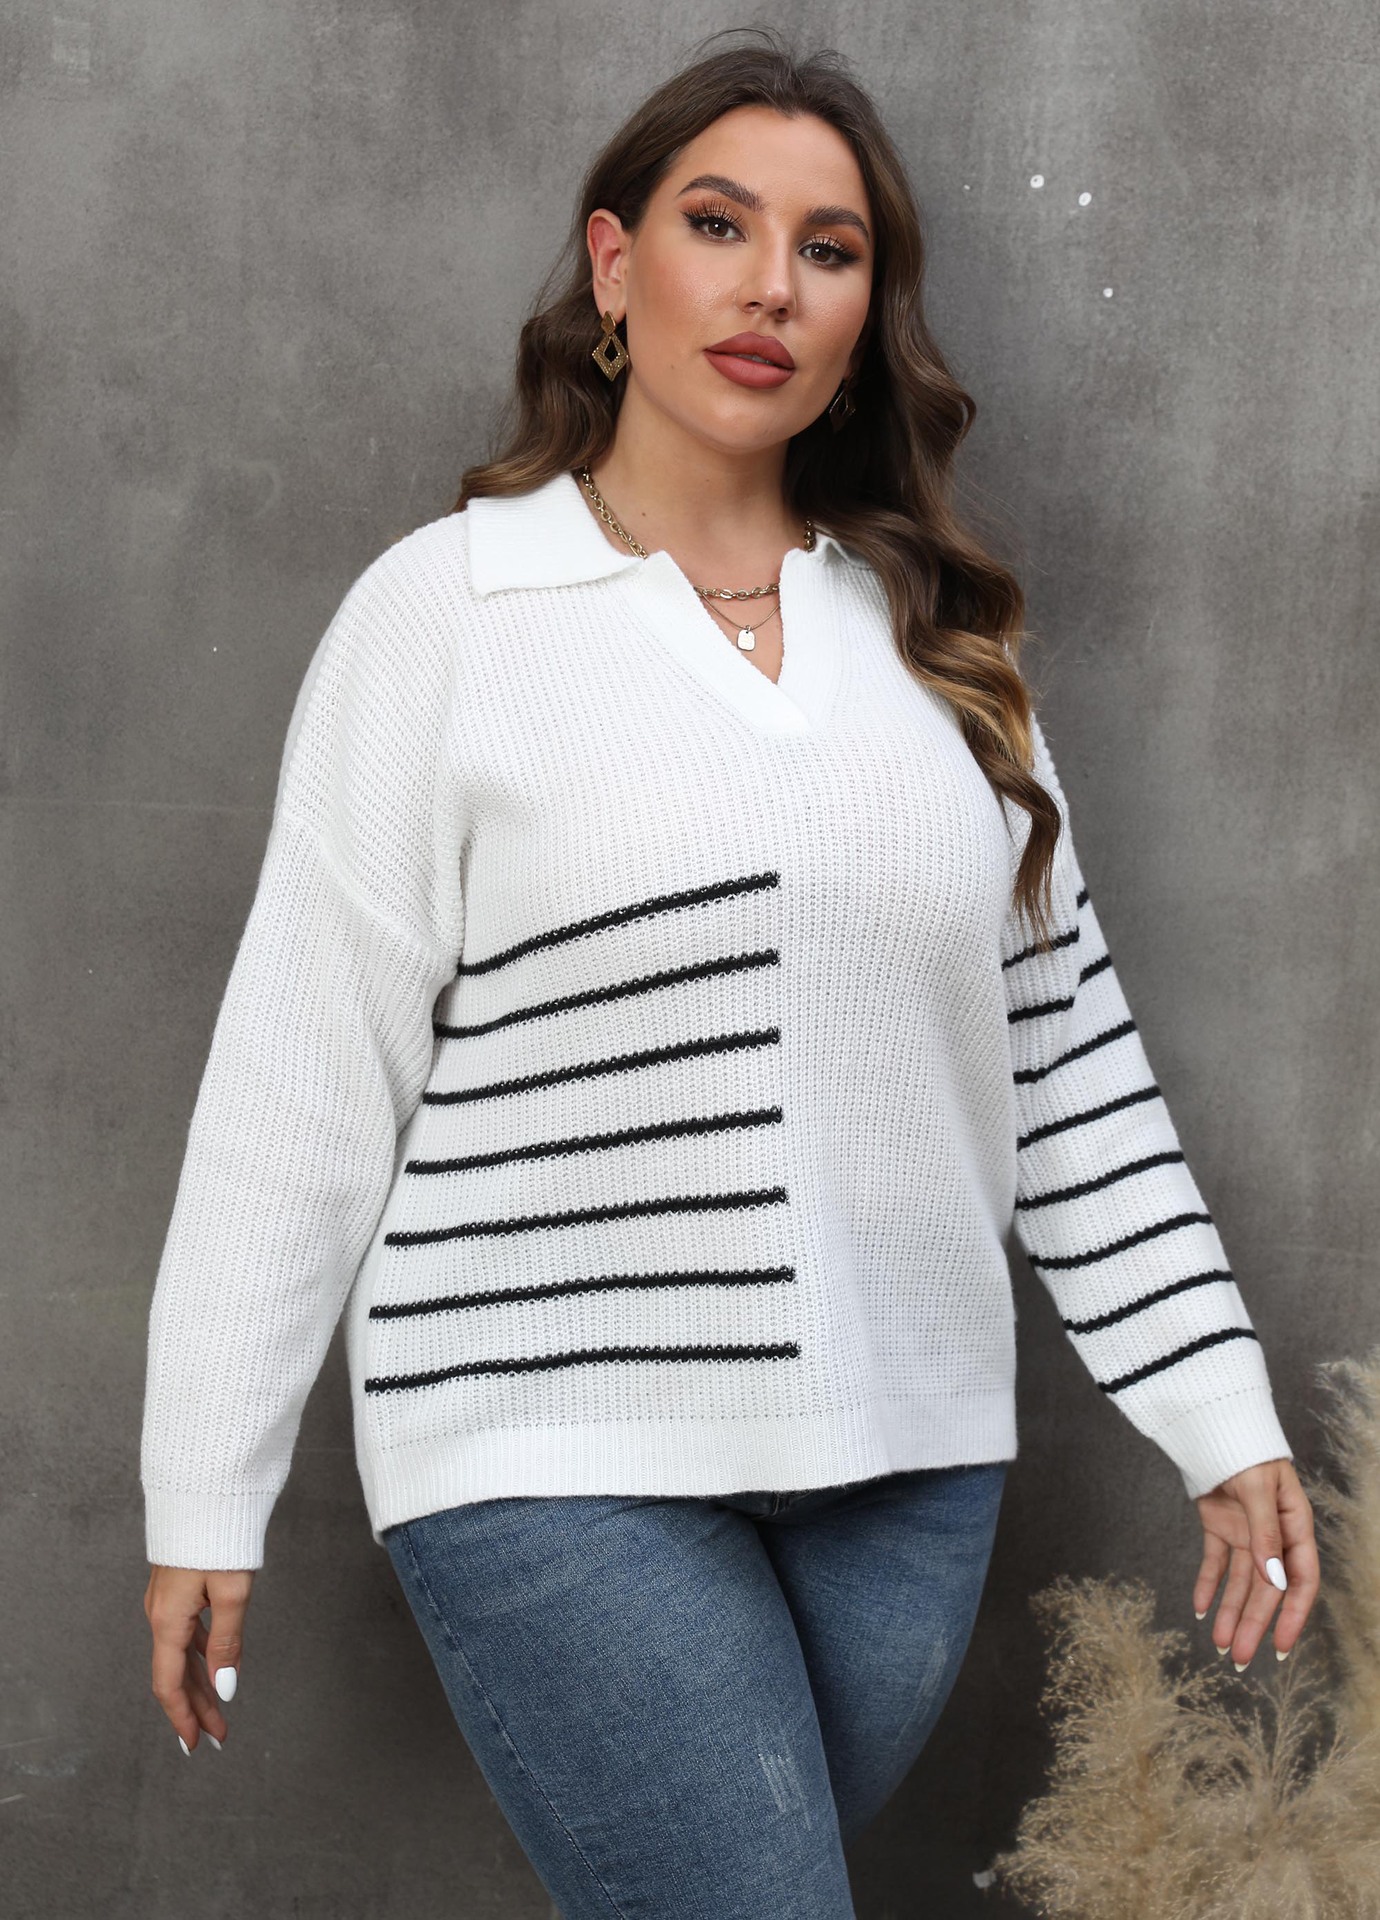 Ladies Pullover Knit Top Plus Size Women's Fall Winter Contrasting